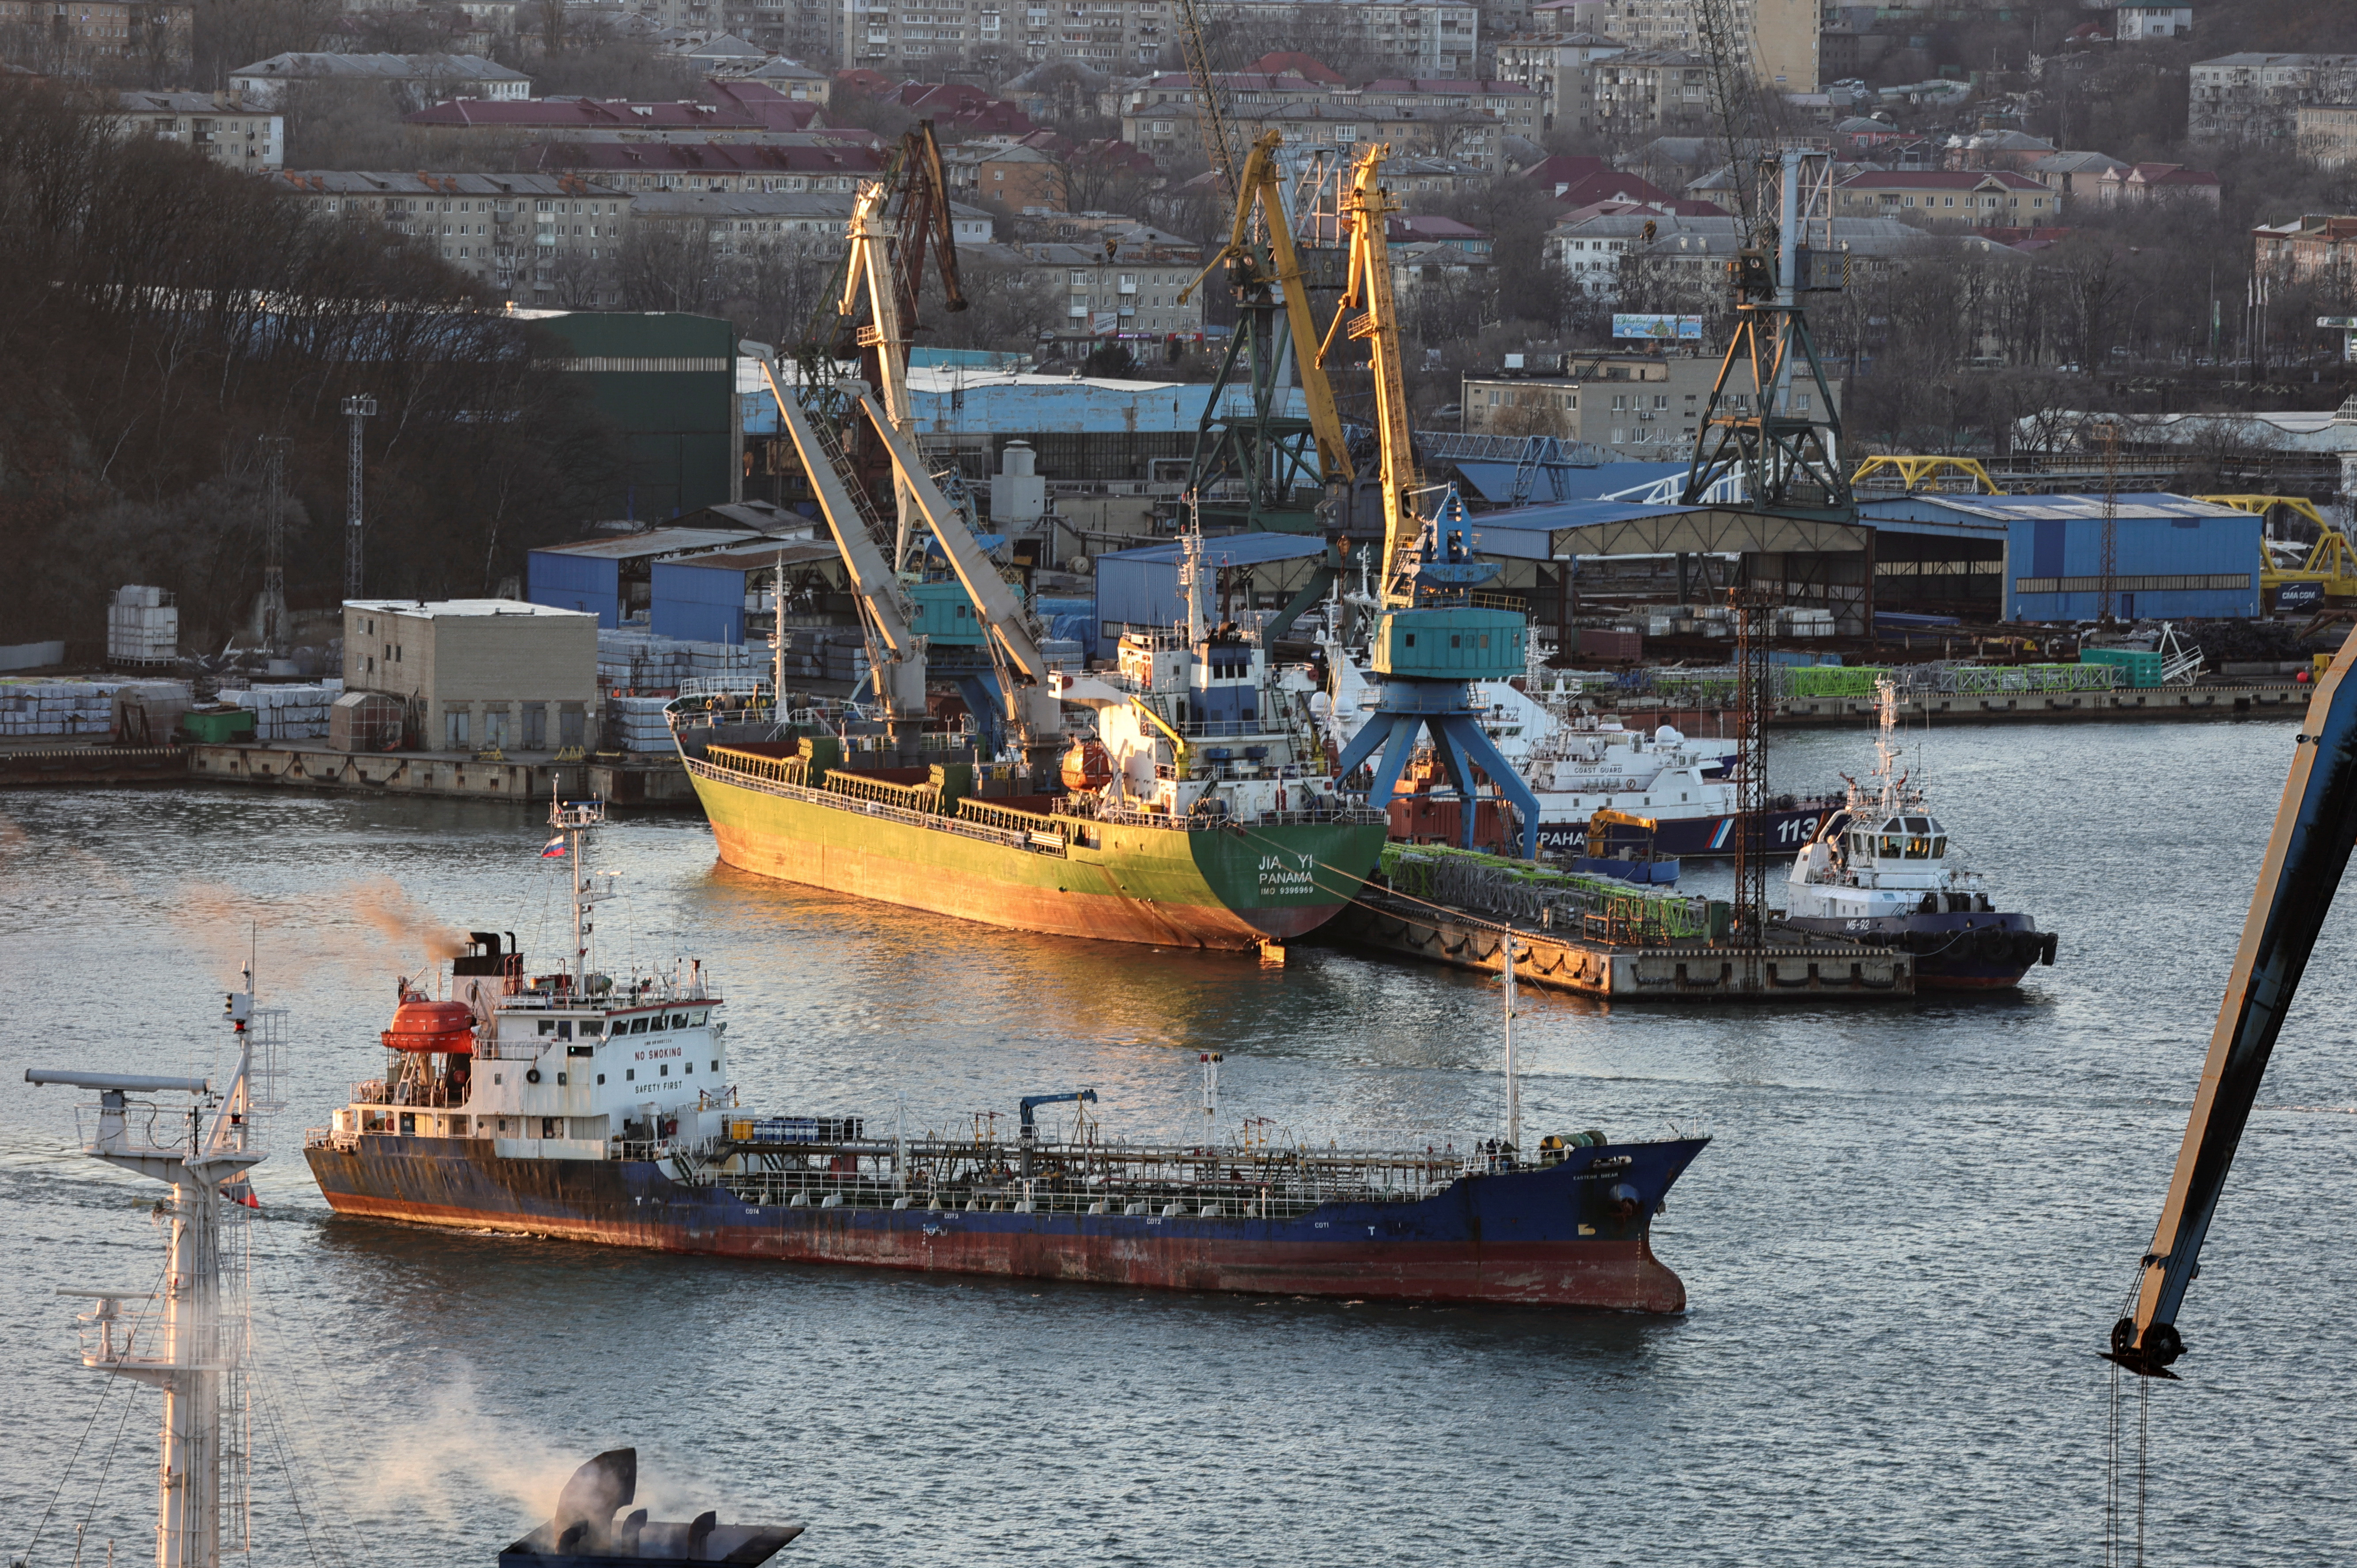 Vessels are seen in the port city of Nakhodka